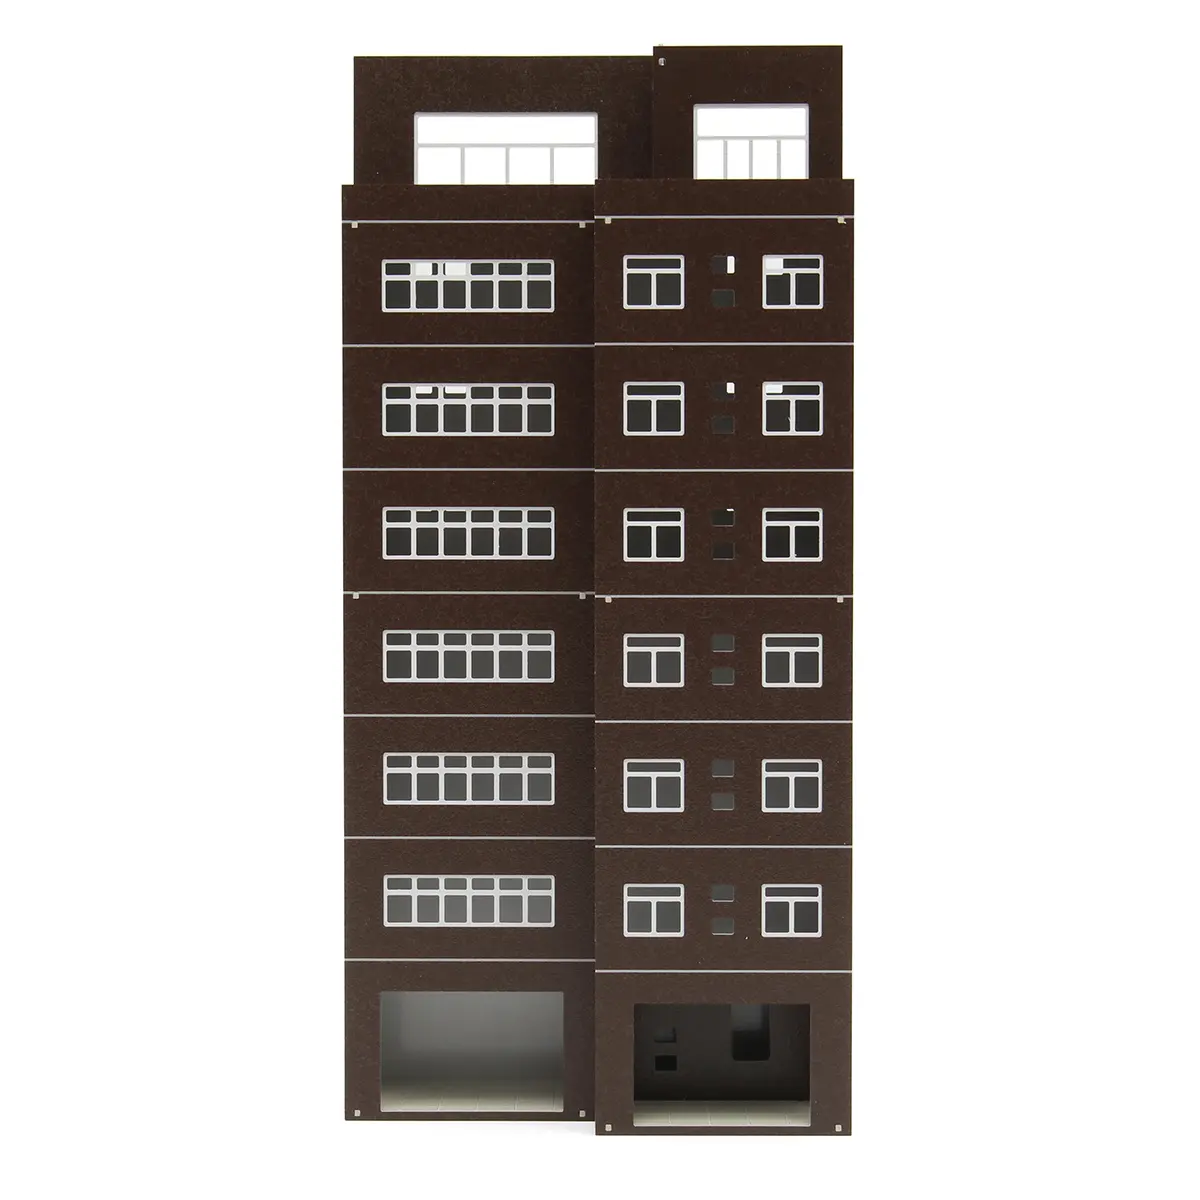 Coffee Outland Models Modern Tall Business Building Office For GUNDAM Building